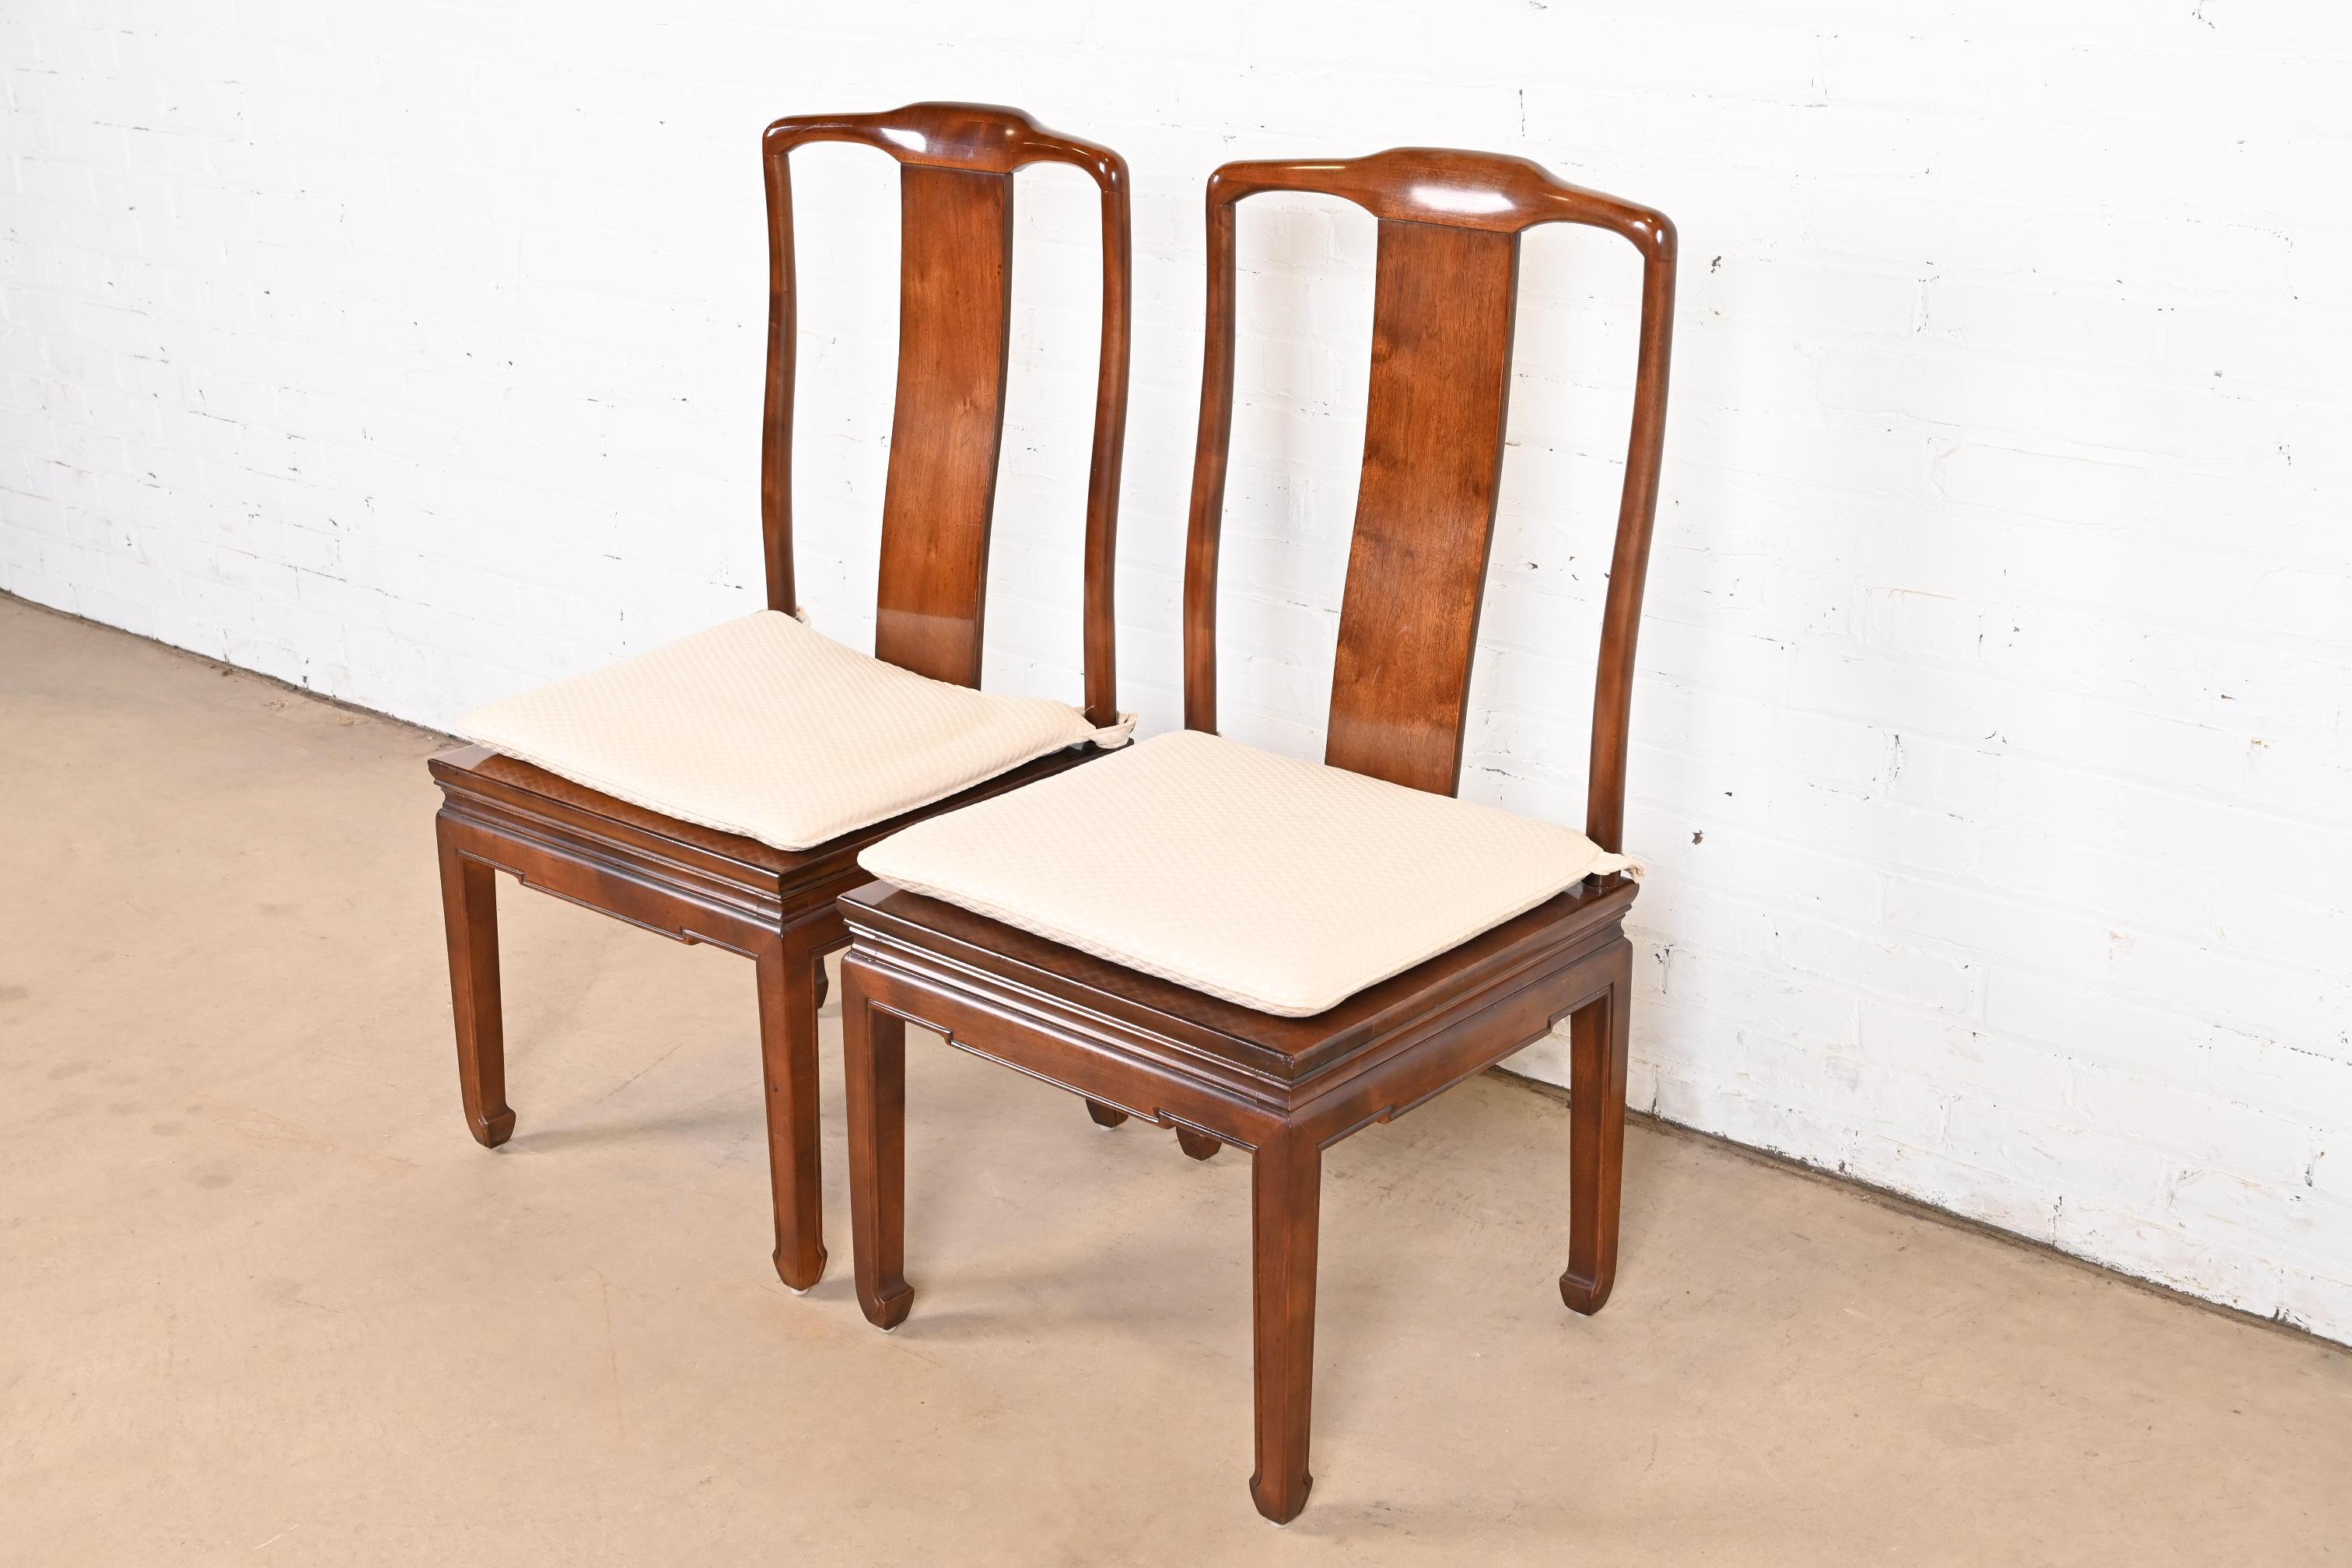 American Henredon Hollywood Regency Chinoiserie Sculpted Mahogany Dining Chairs, Pair For Sale